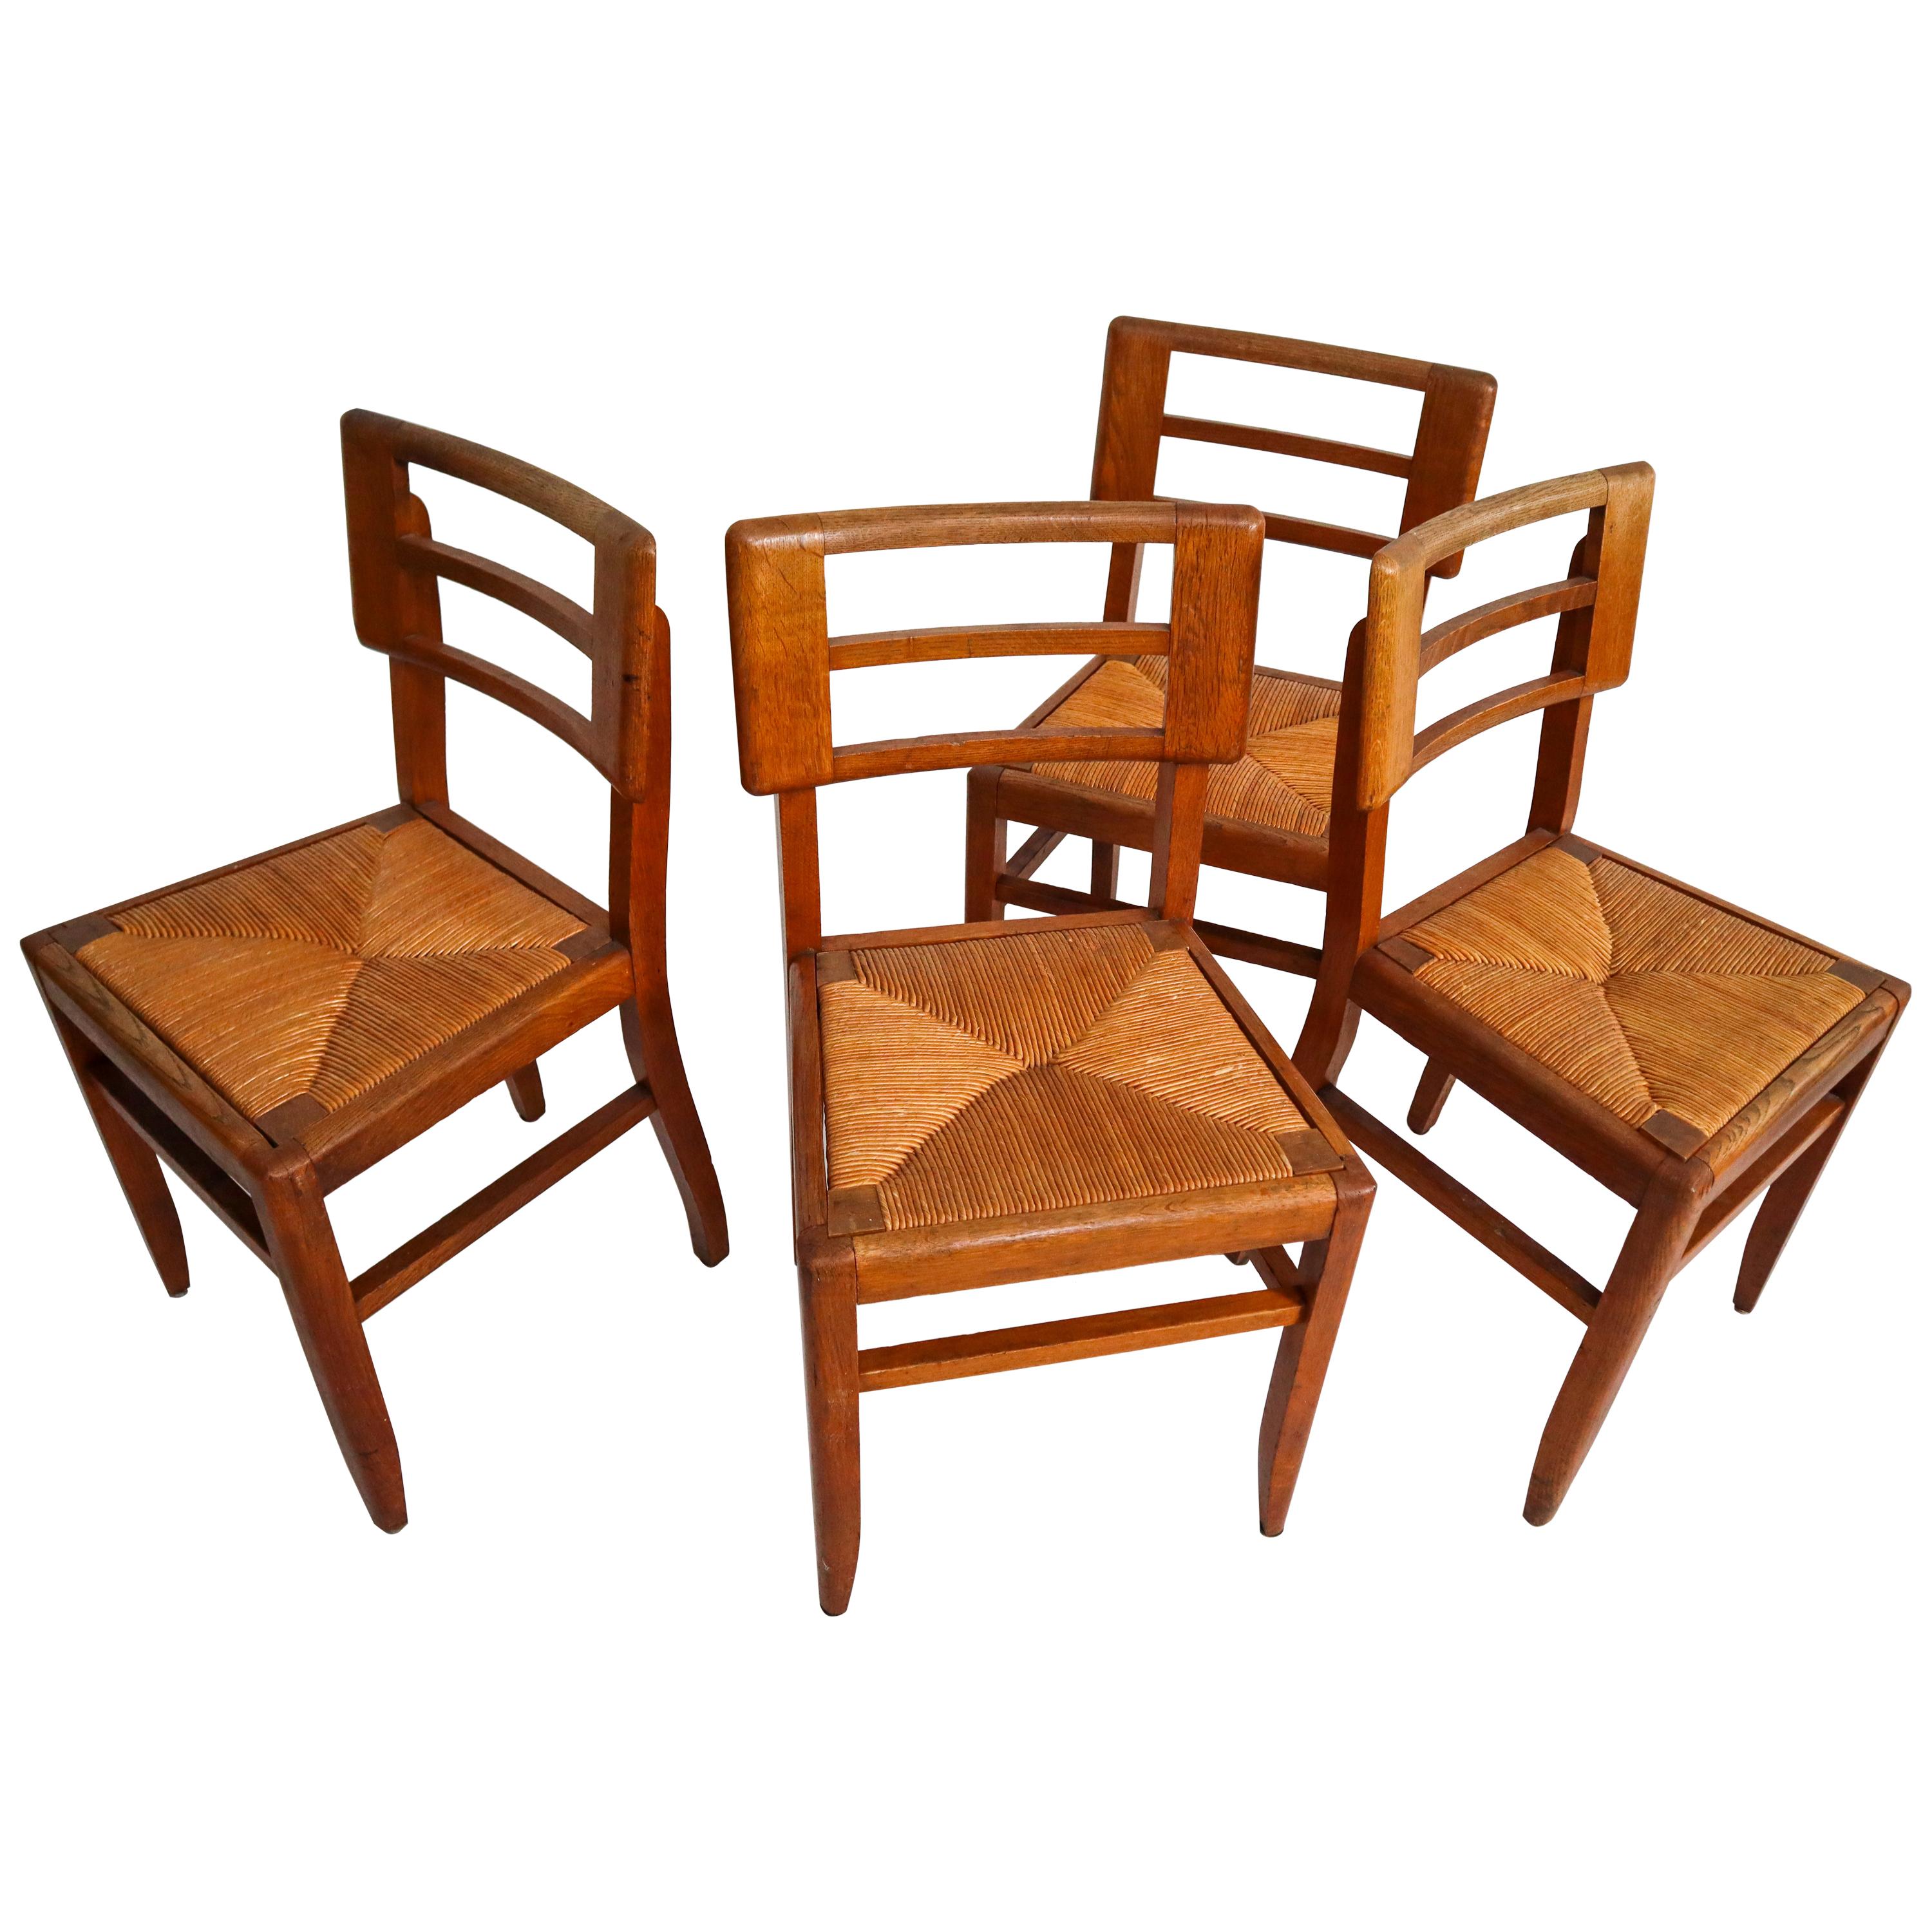 Set of Four Dining Chairs by Pierre Cruege in Oak and Cane, France, 1940s